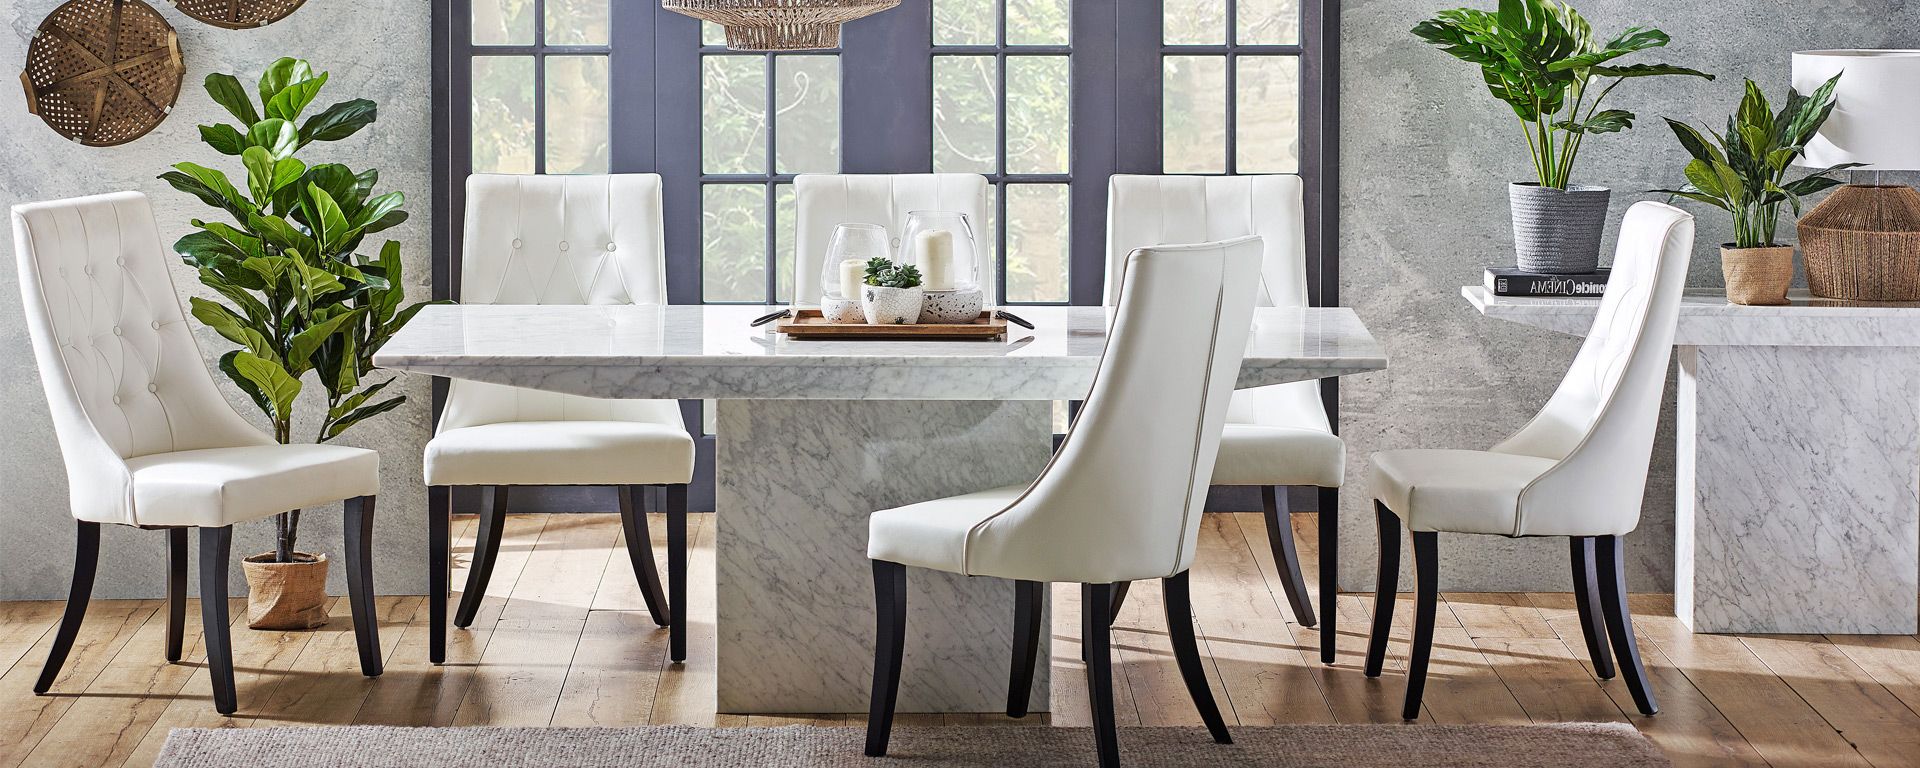 Trendy Christie Round Marble Dining Tables Pertaining To Dining Room Goals: 5 Trending Concrete And Stone Dining (Photo 12 of 25)